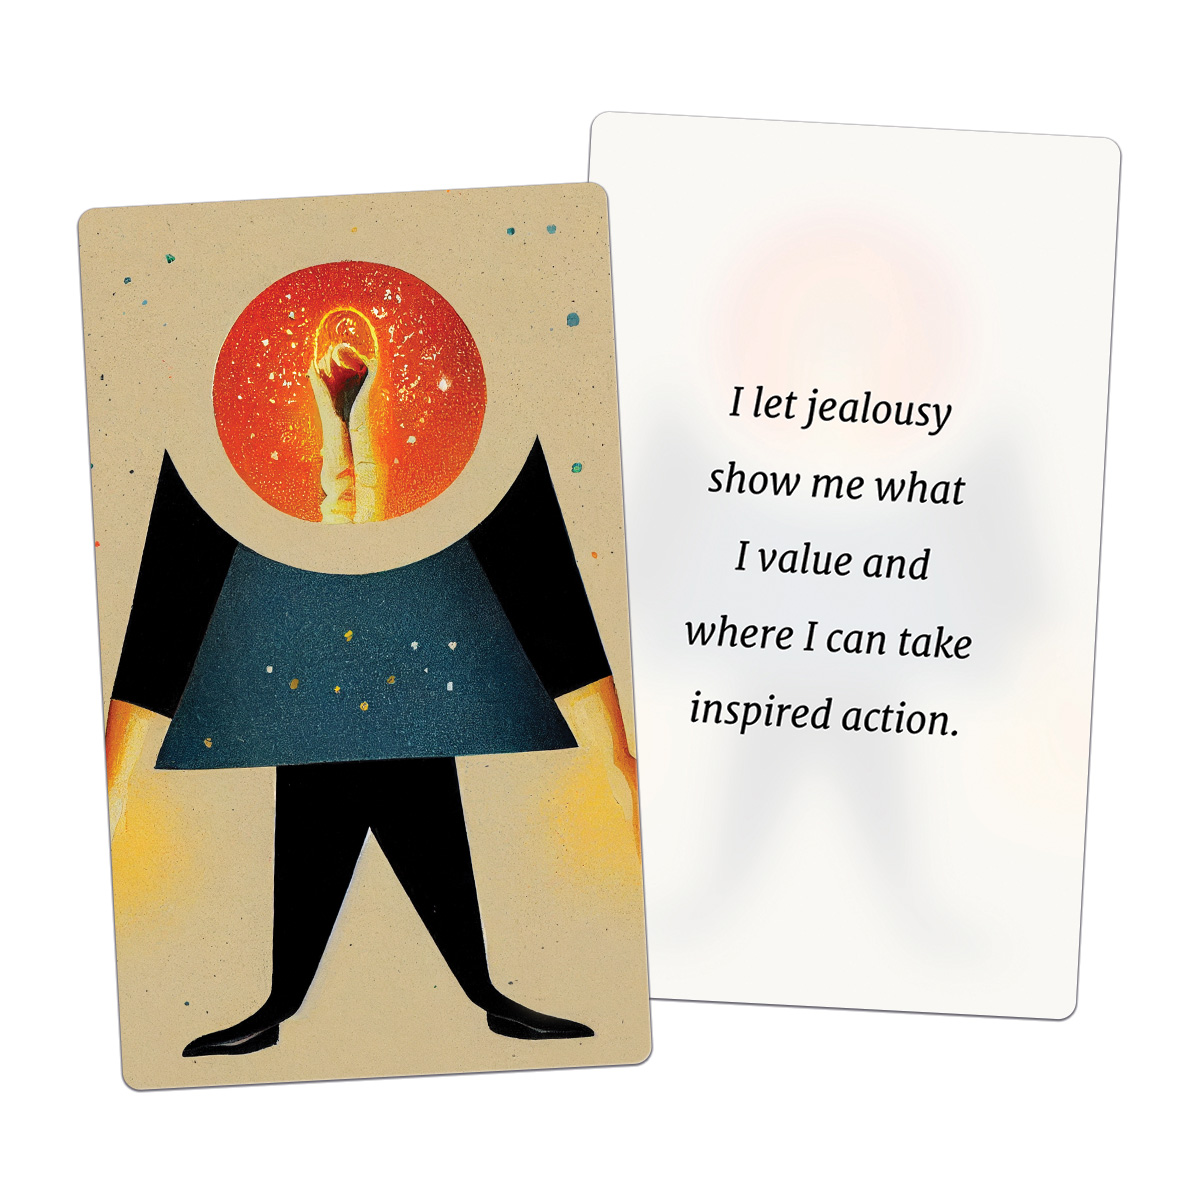 I let jealousy show me what I value and where I can take inspired action. (AFFIRMATION CARD MOCKUP)